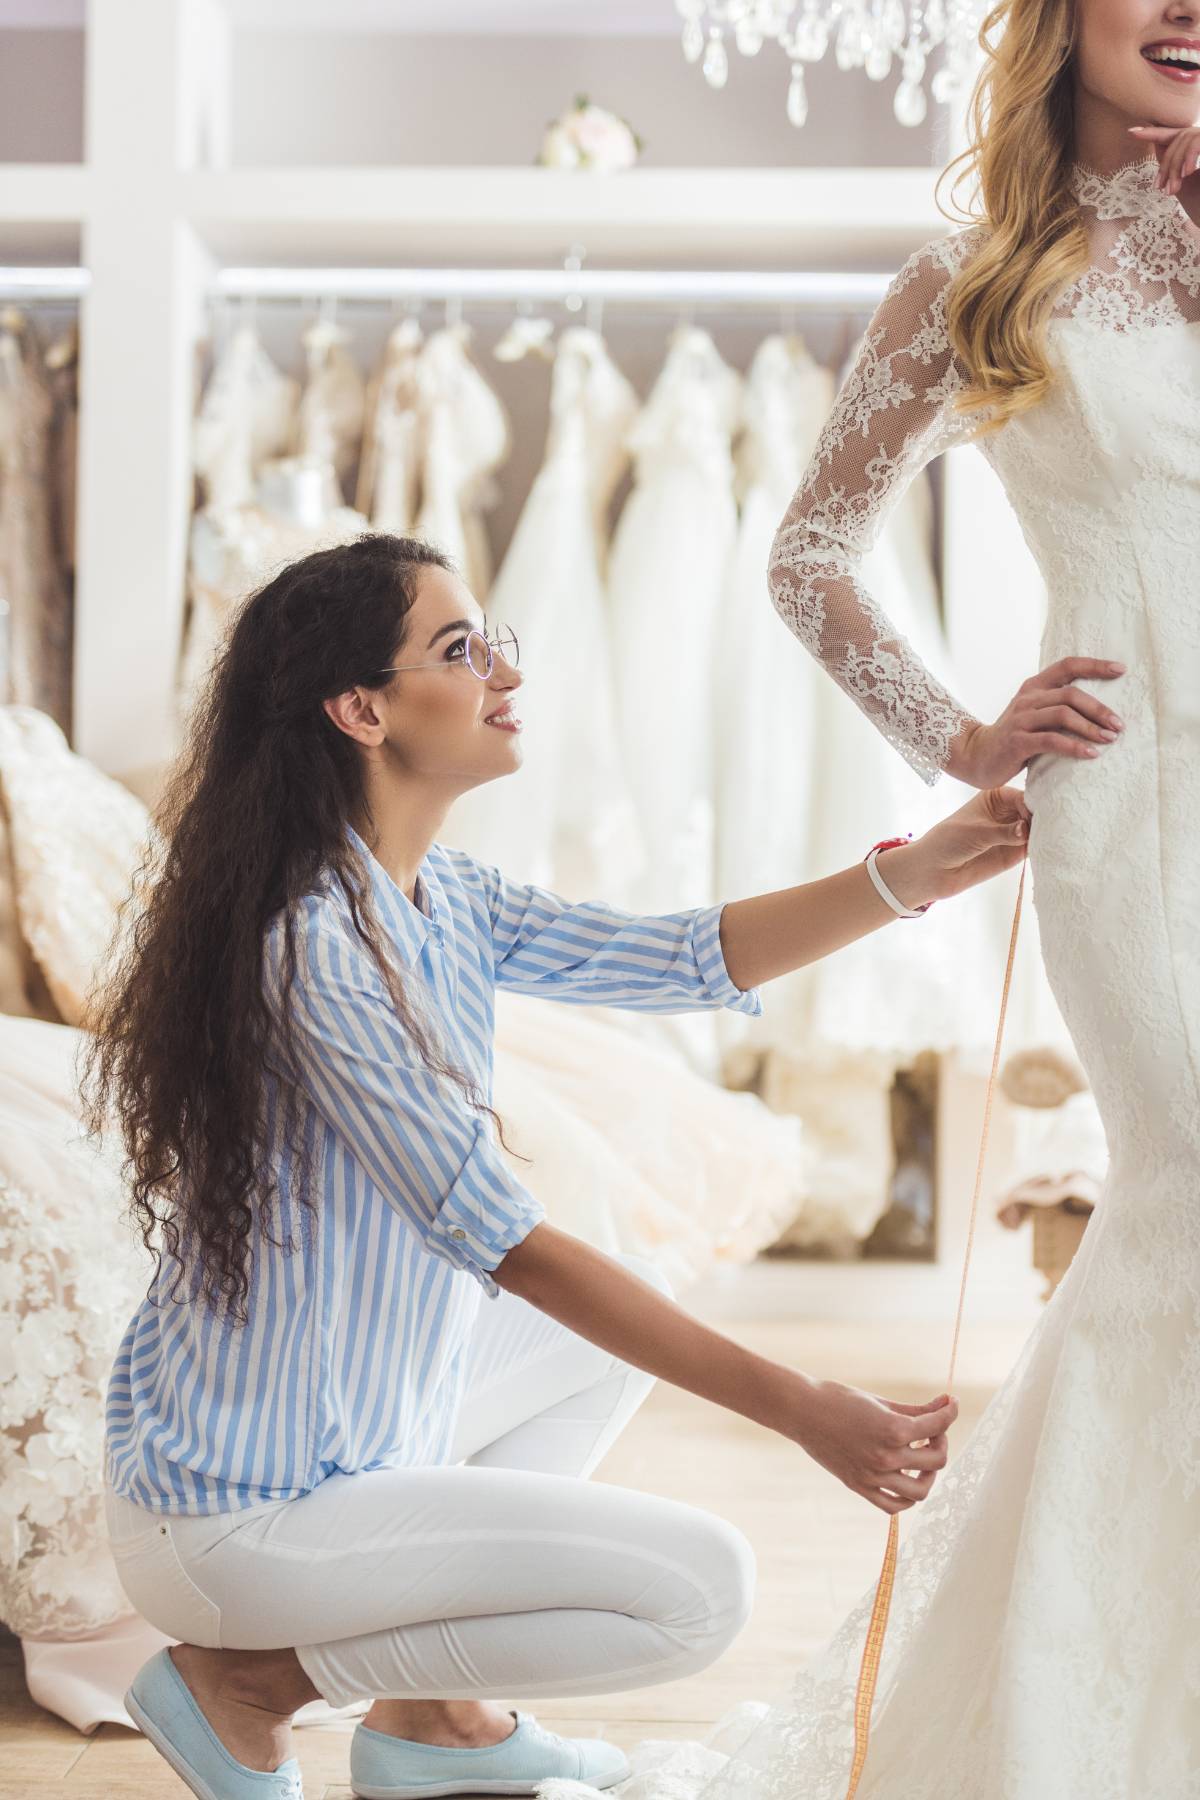 What to Ask Your Bridal Shop Stylist